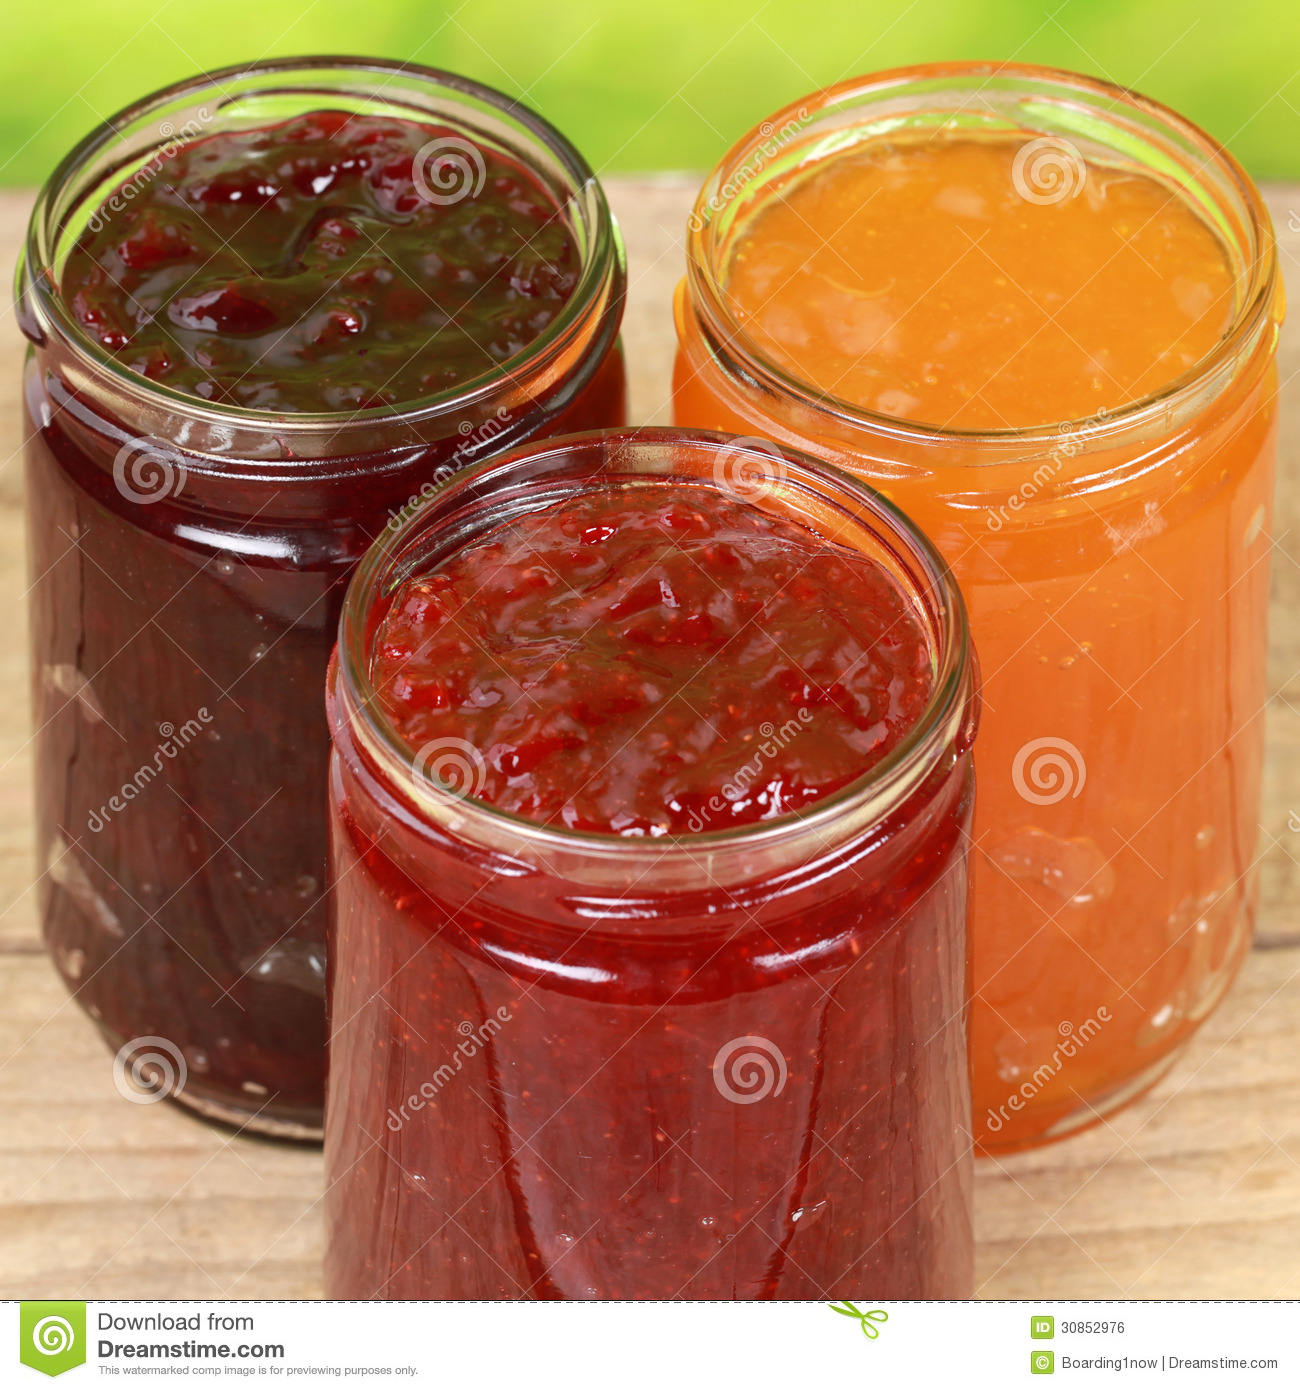 Varieties Of Marmalade Made From Strawberries Cherries And Apricots